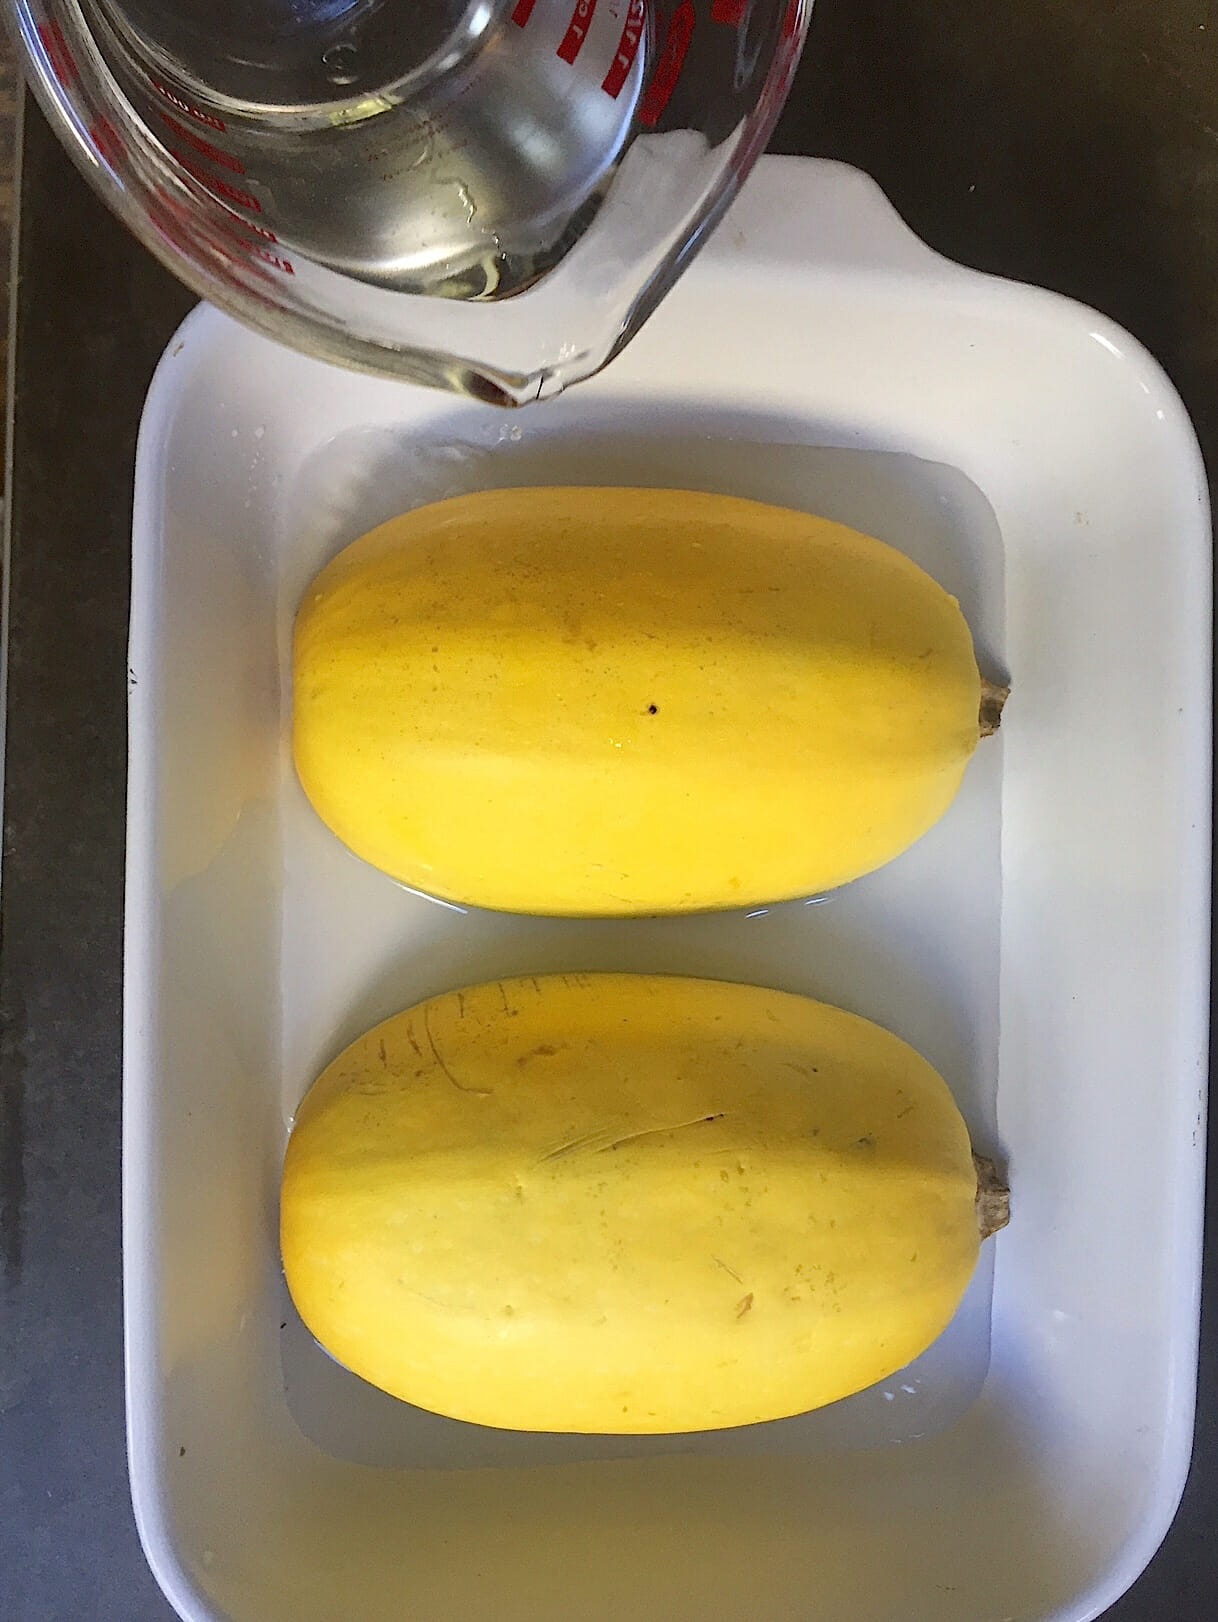 Spaghetti Squash Microwave
 How to Cook Spaghetti Squash in the Microwave in just a